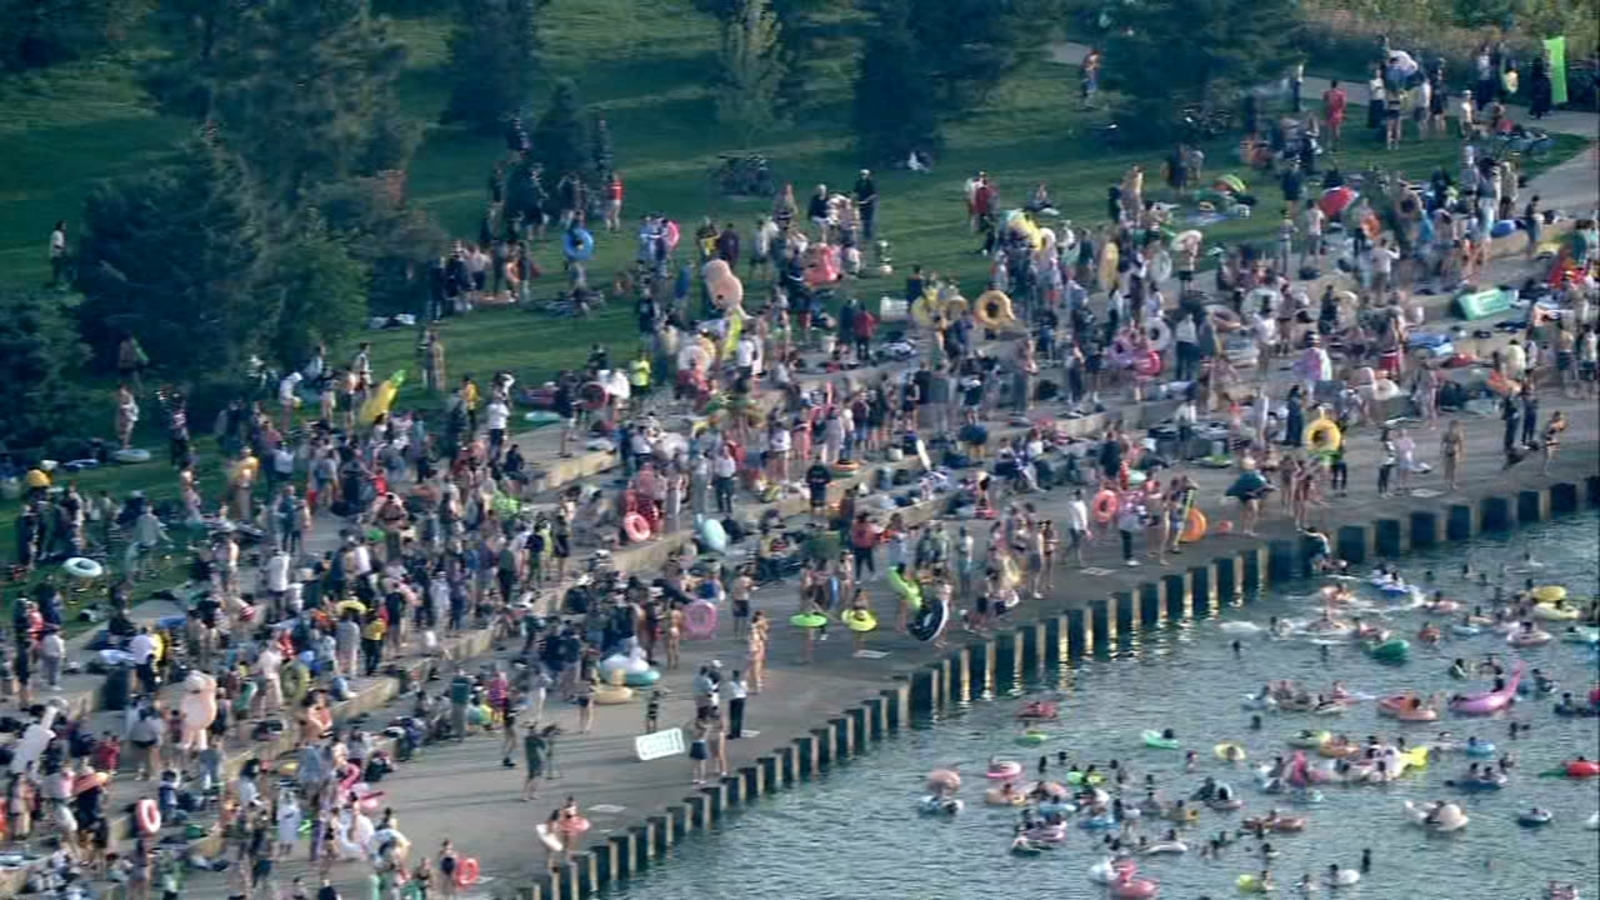 Friday Morning Swim Club Chicago: Weekly Montrose Harbor event will not return this summer, organizers say [Video]